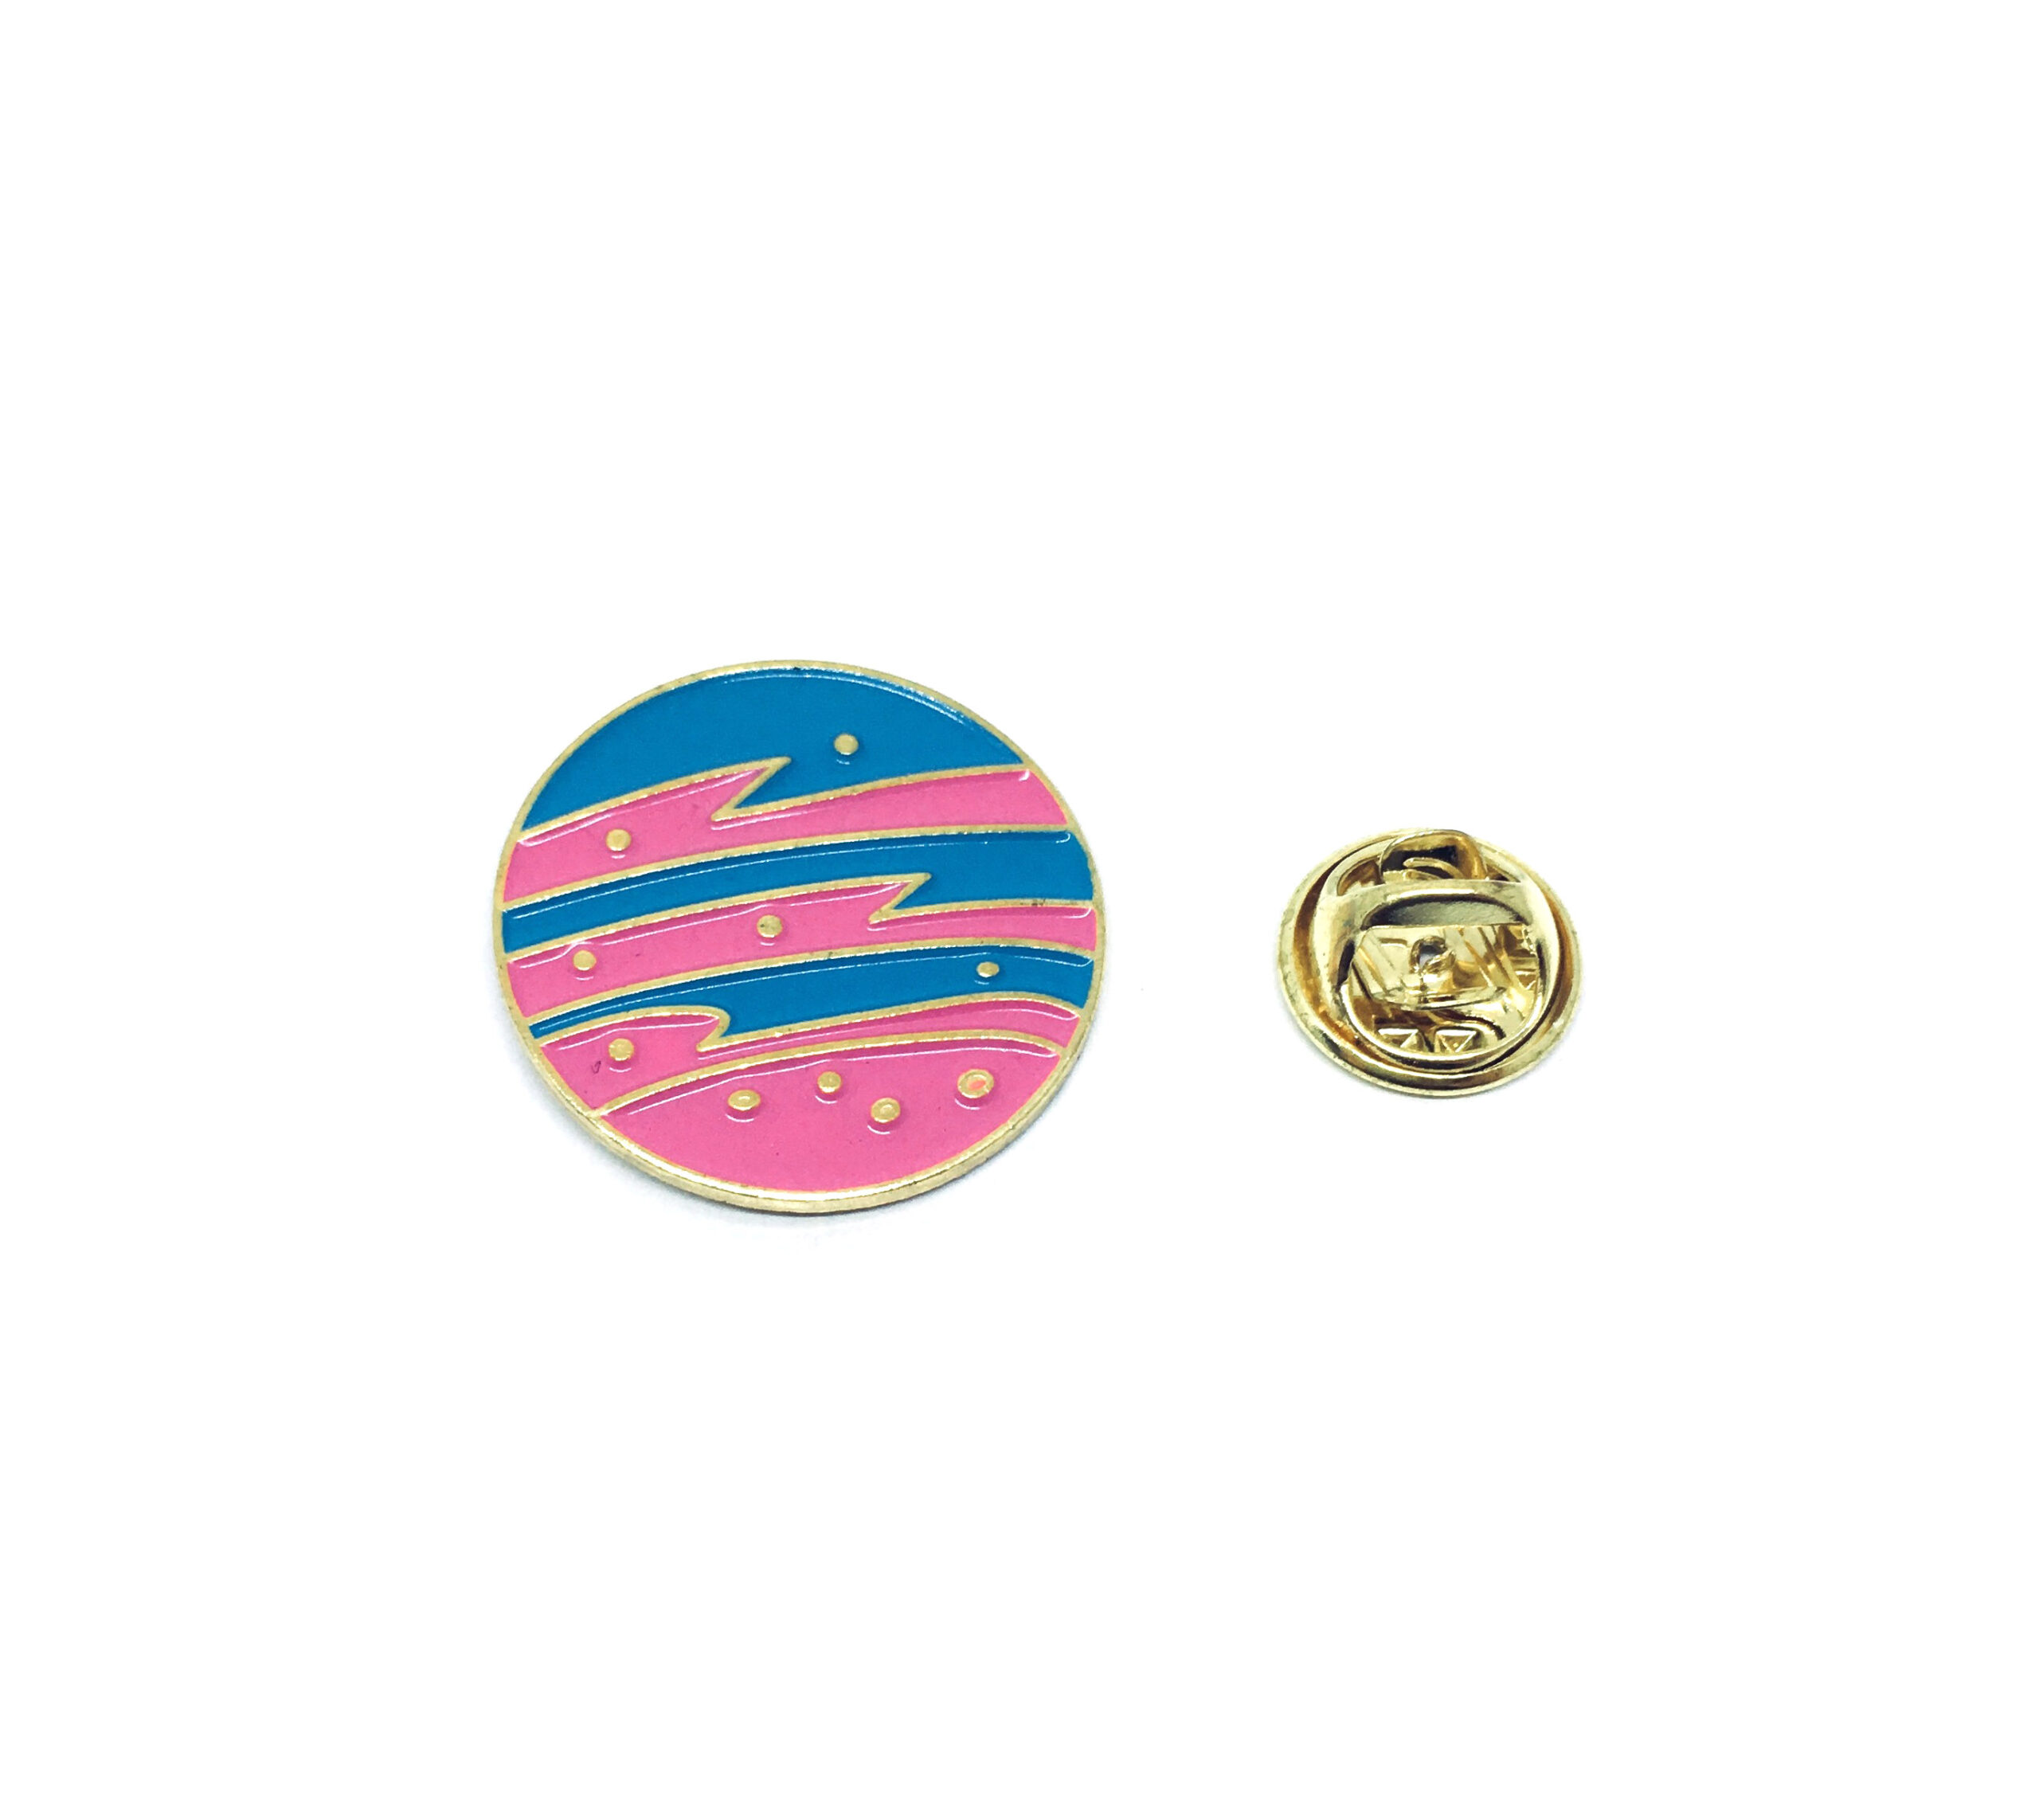 Planet Space Pin